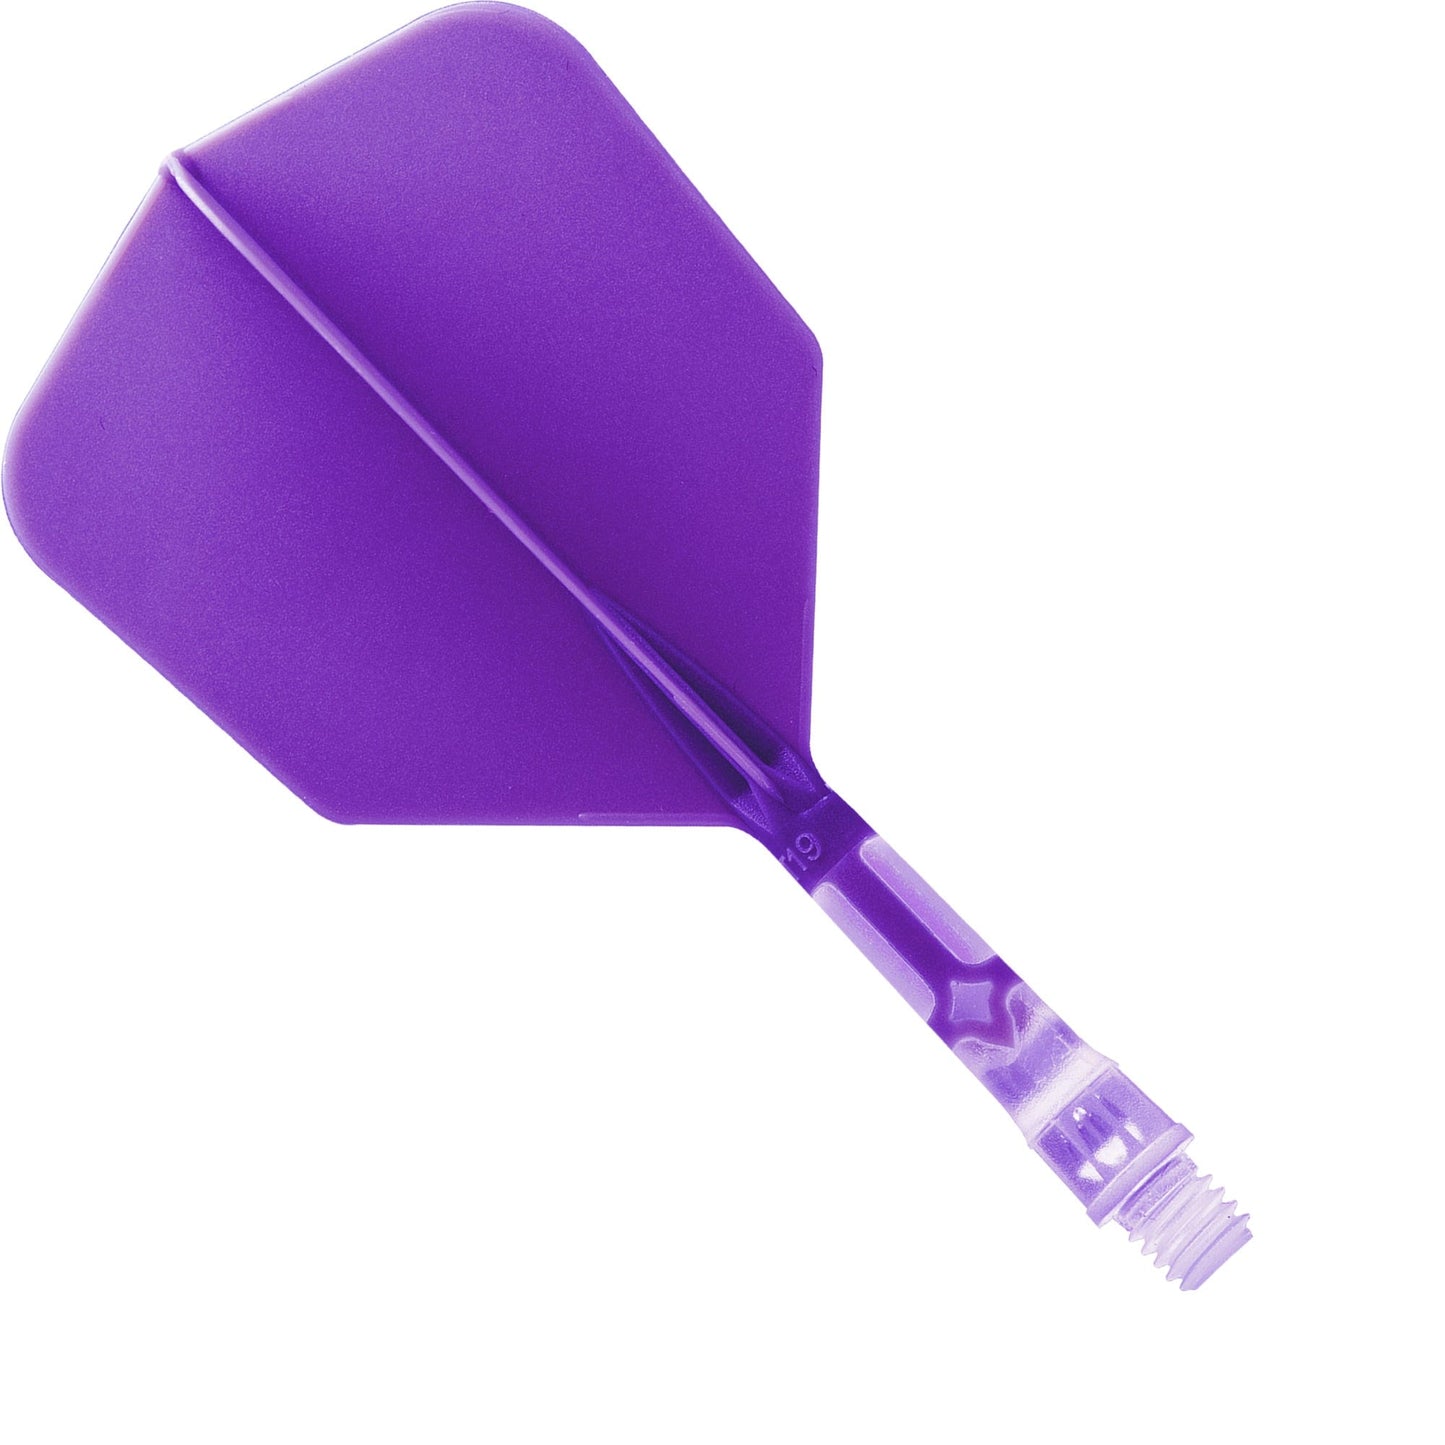 Cuesoul Rost T19 Integrated Dart Shaft and Flights - Big Wing - Clear with Purple Flight Short